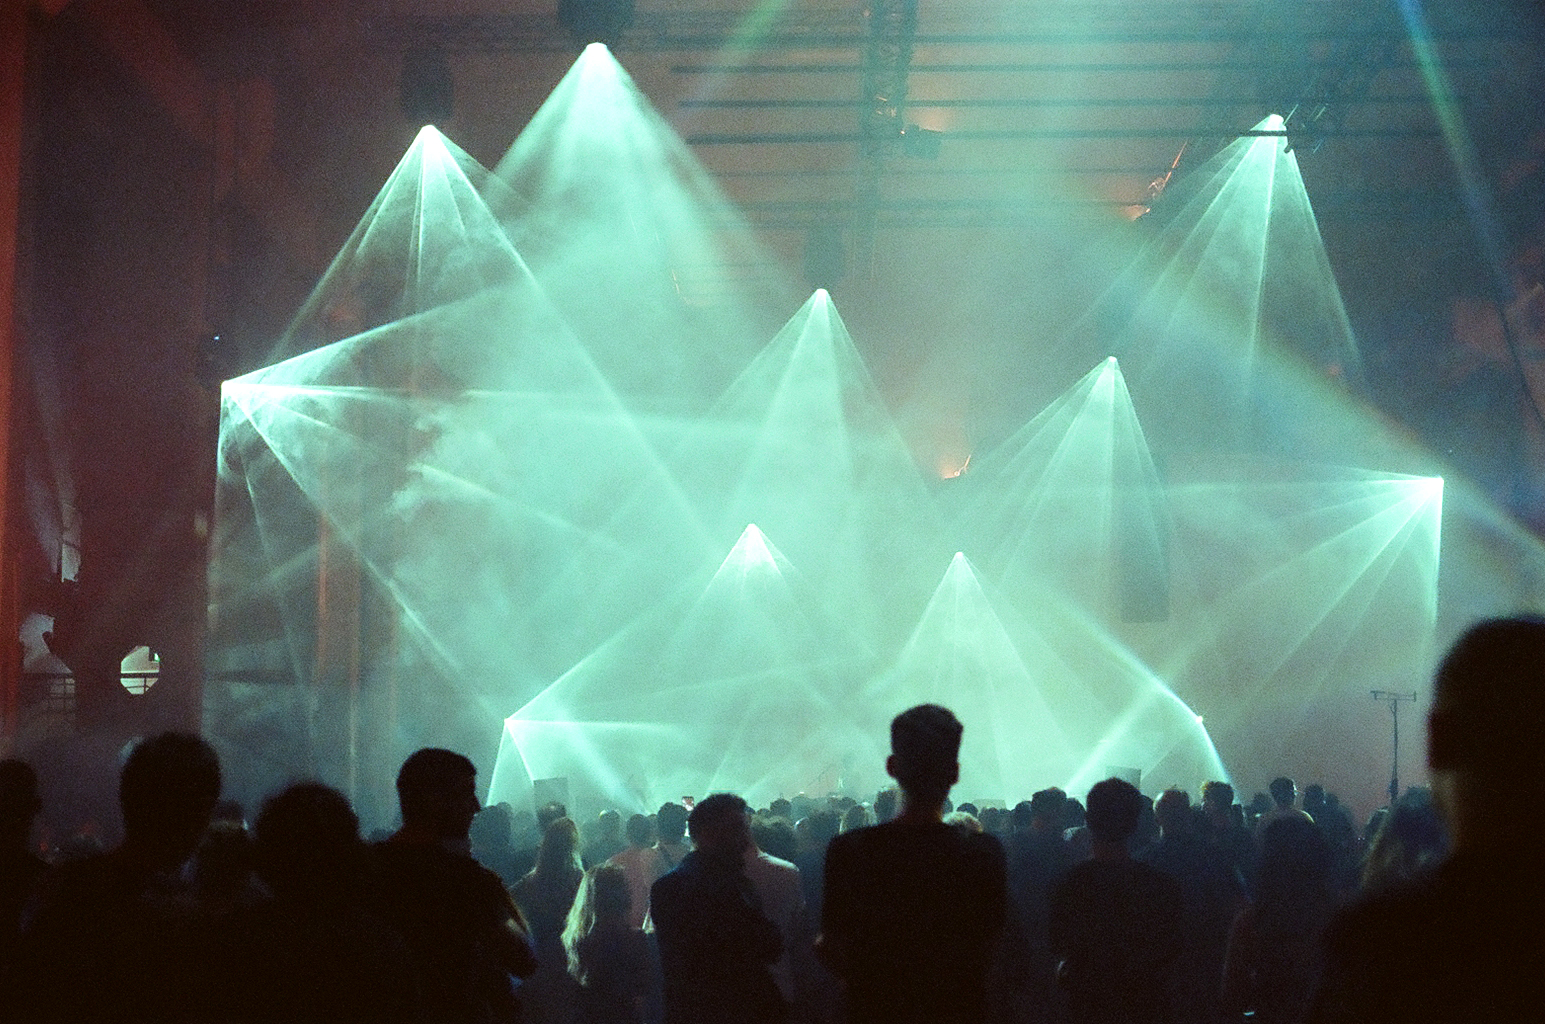 Berlin Atonal is the festival fuelling the electronic avantgarde